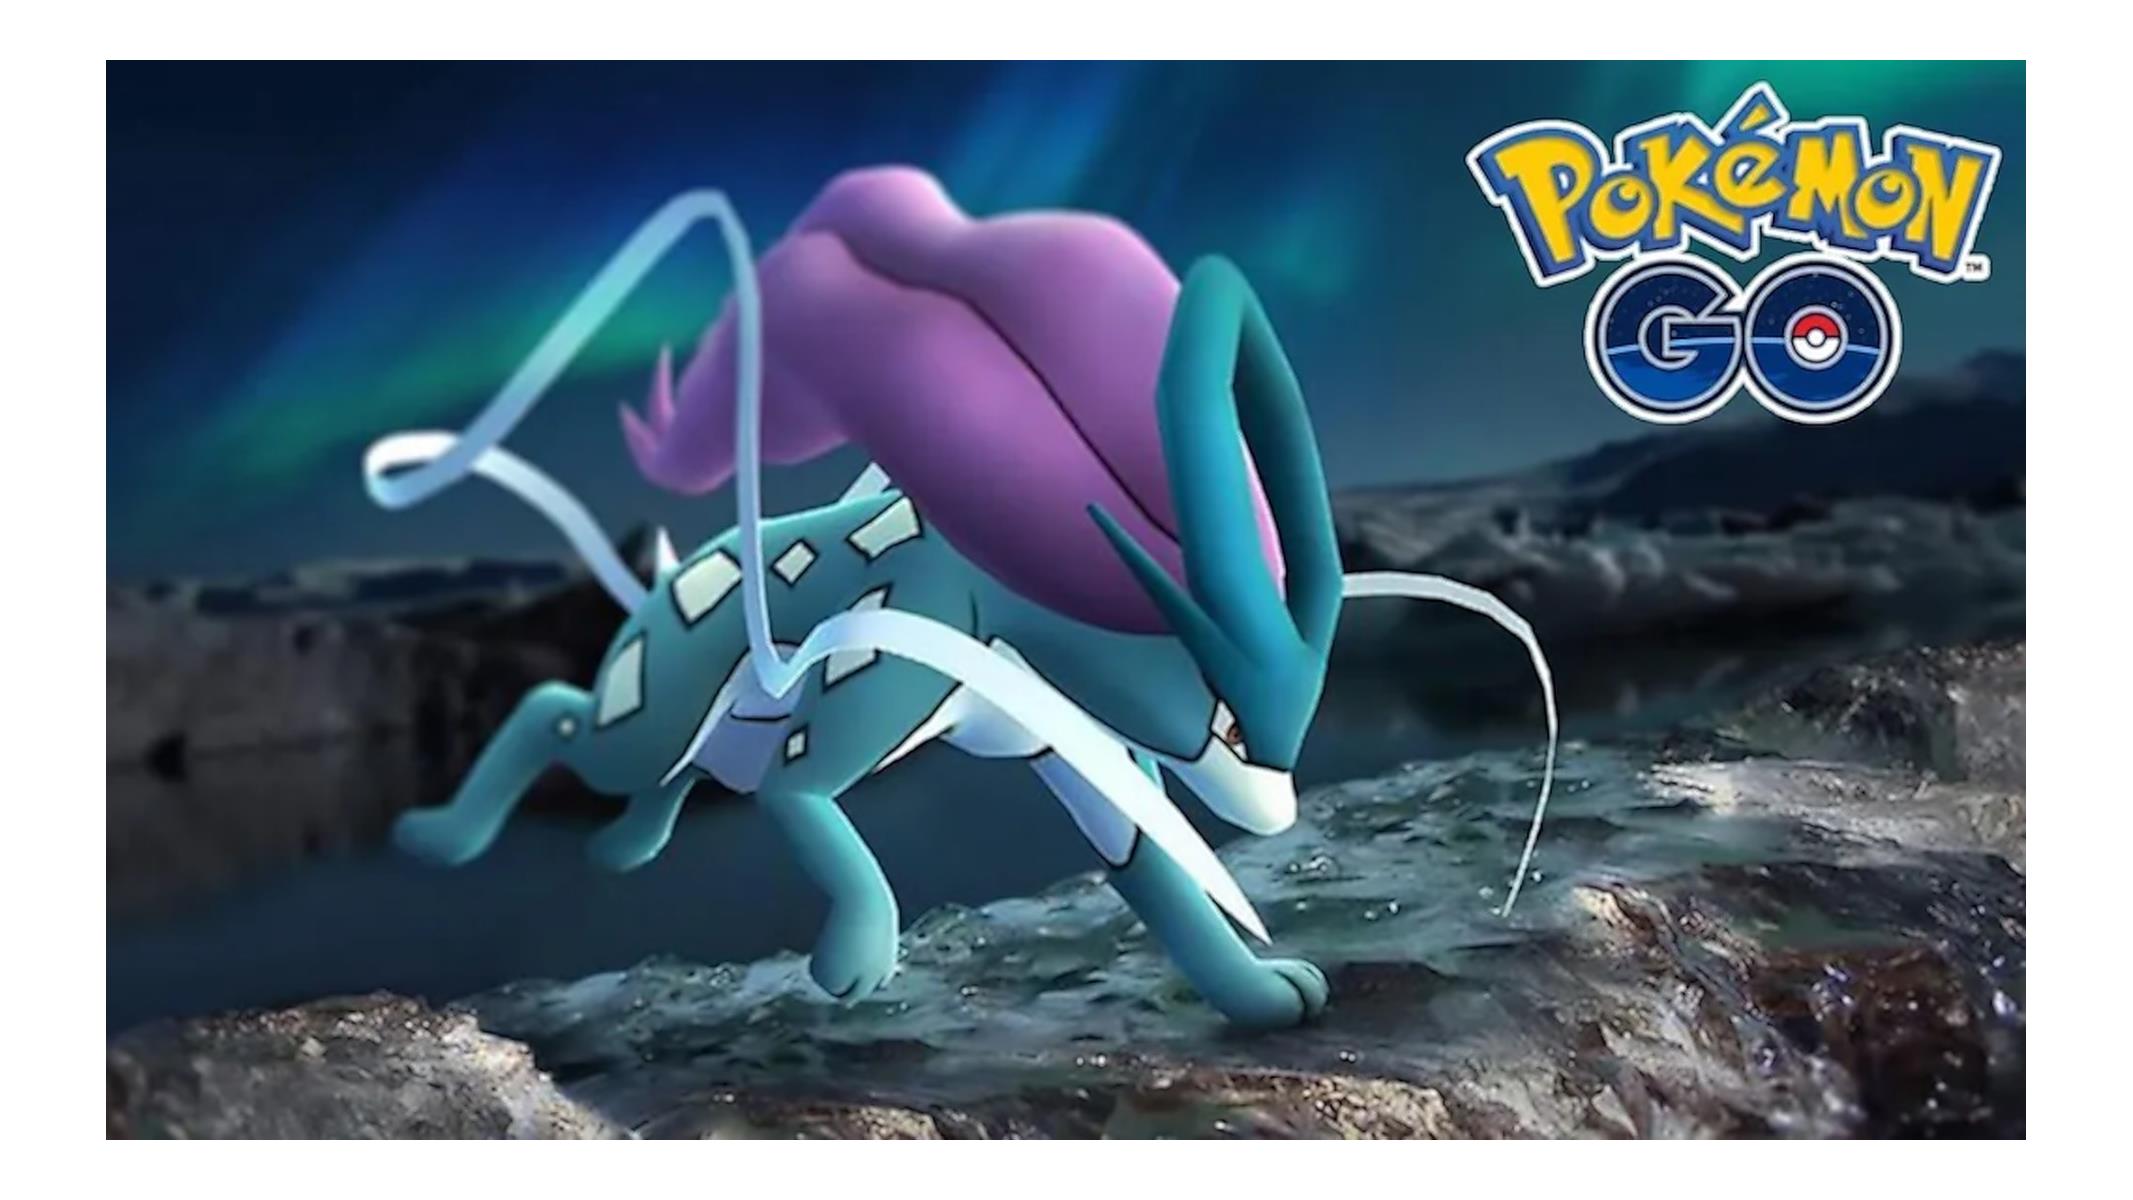 Pokemon Go Raikou, Entei and Suicune Raid news, counters and weakness, Gaming, Entertainment